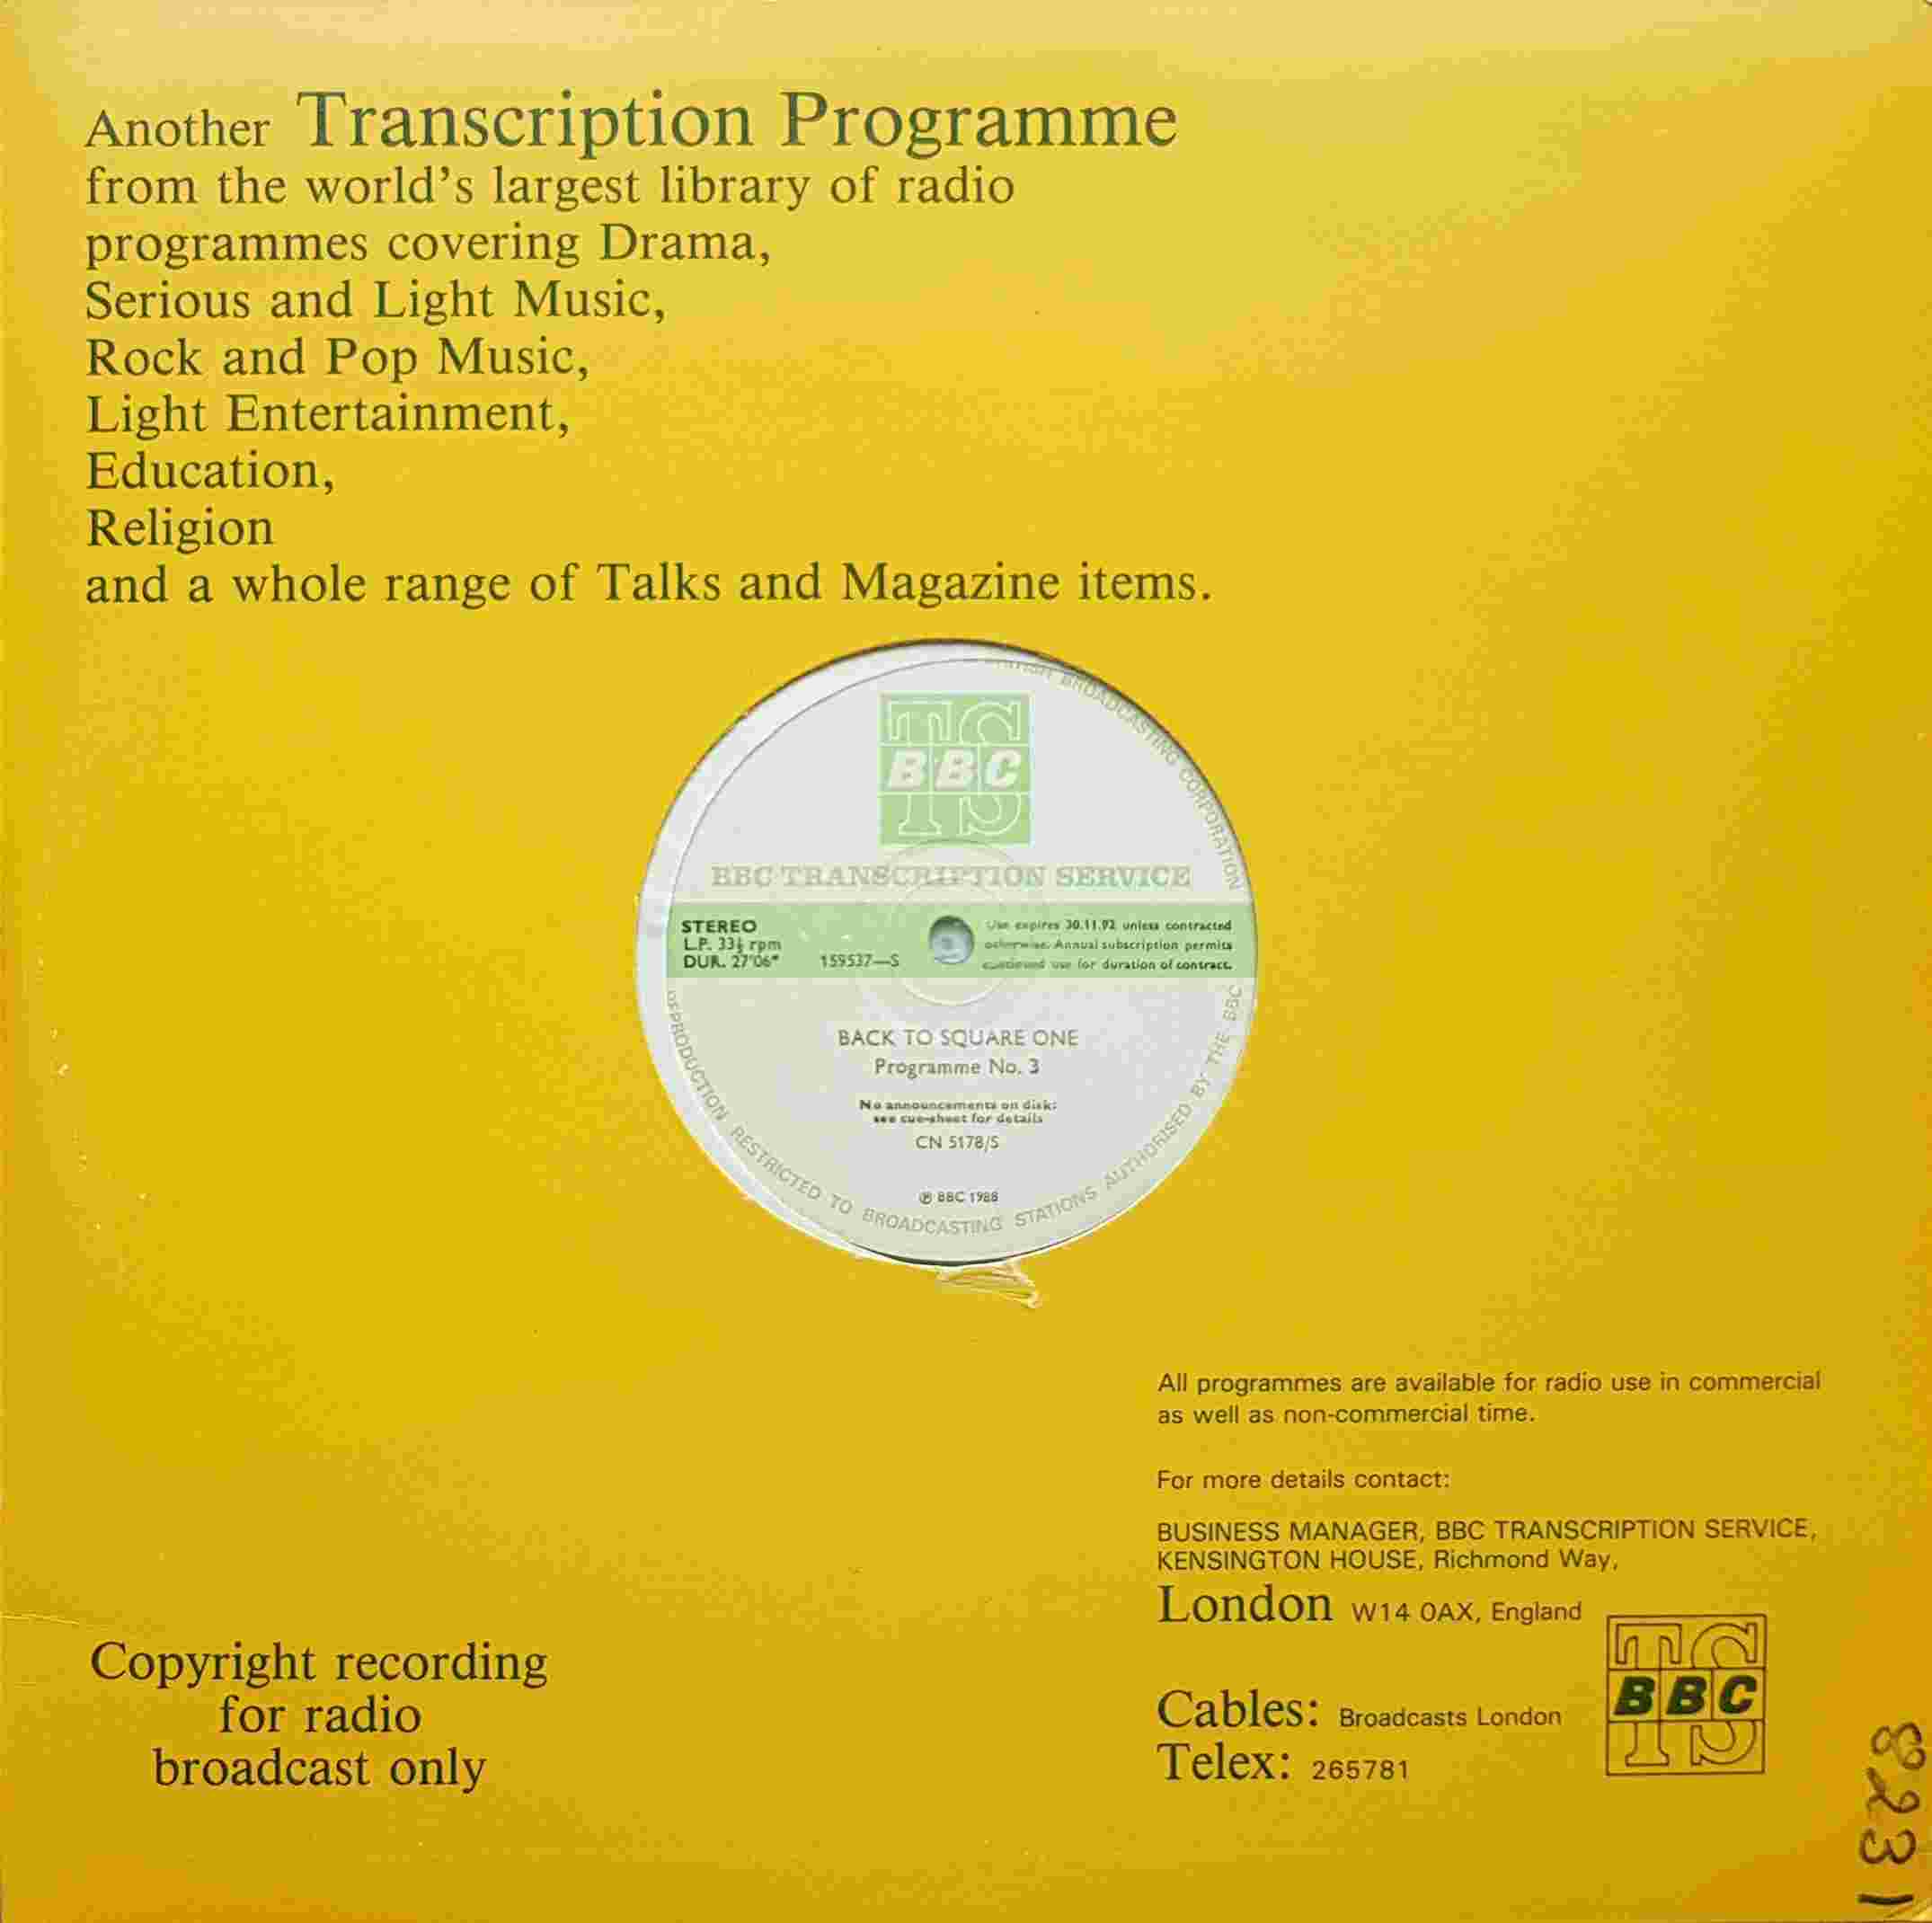 Picture of CN 5178 S 2 Back to square one - Programme 3 & 4 by artist Chris Serle from the BBC albums - Records and Tapes library